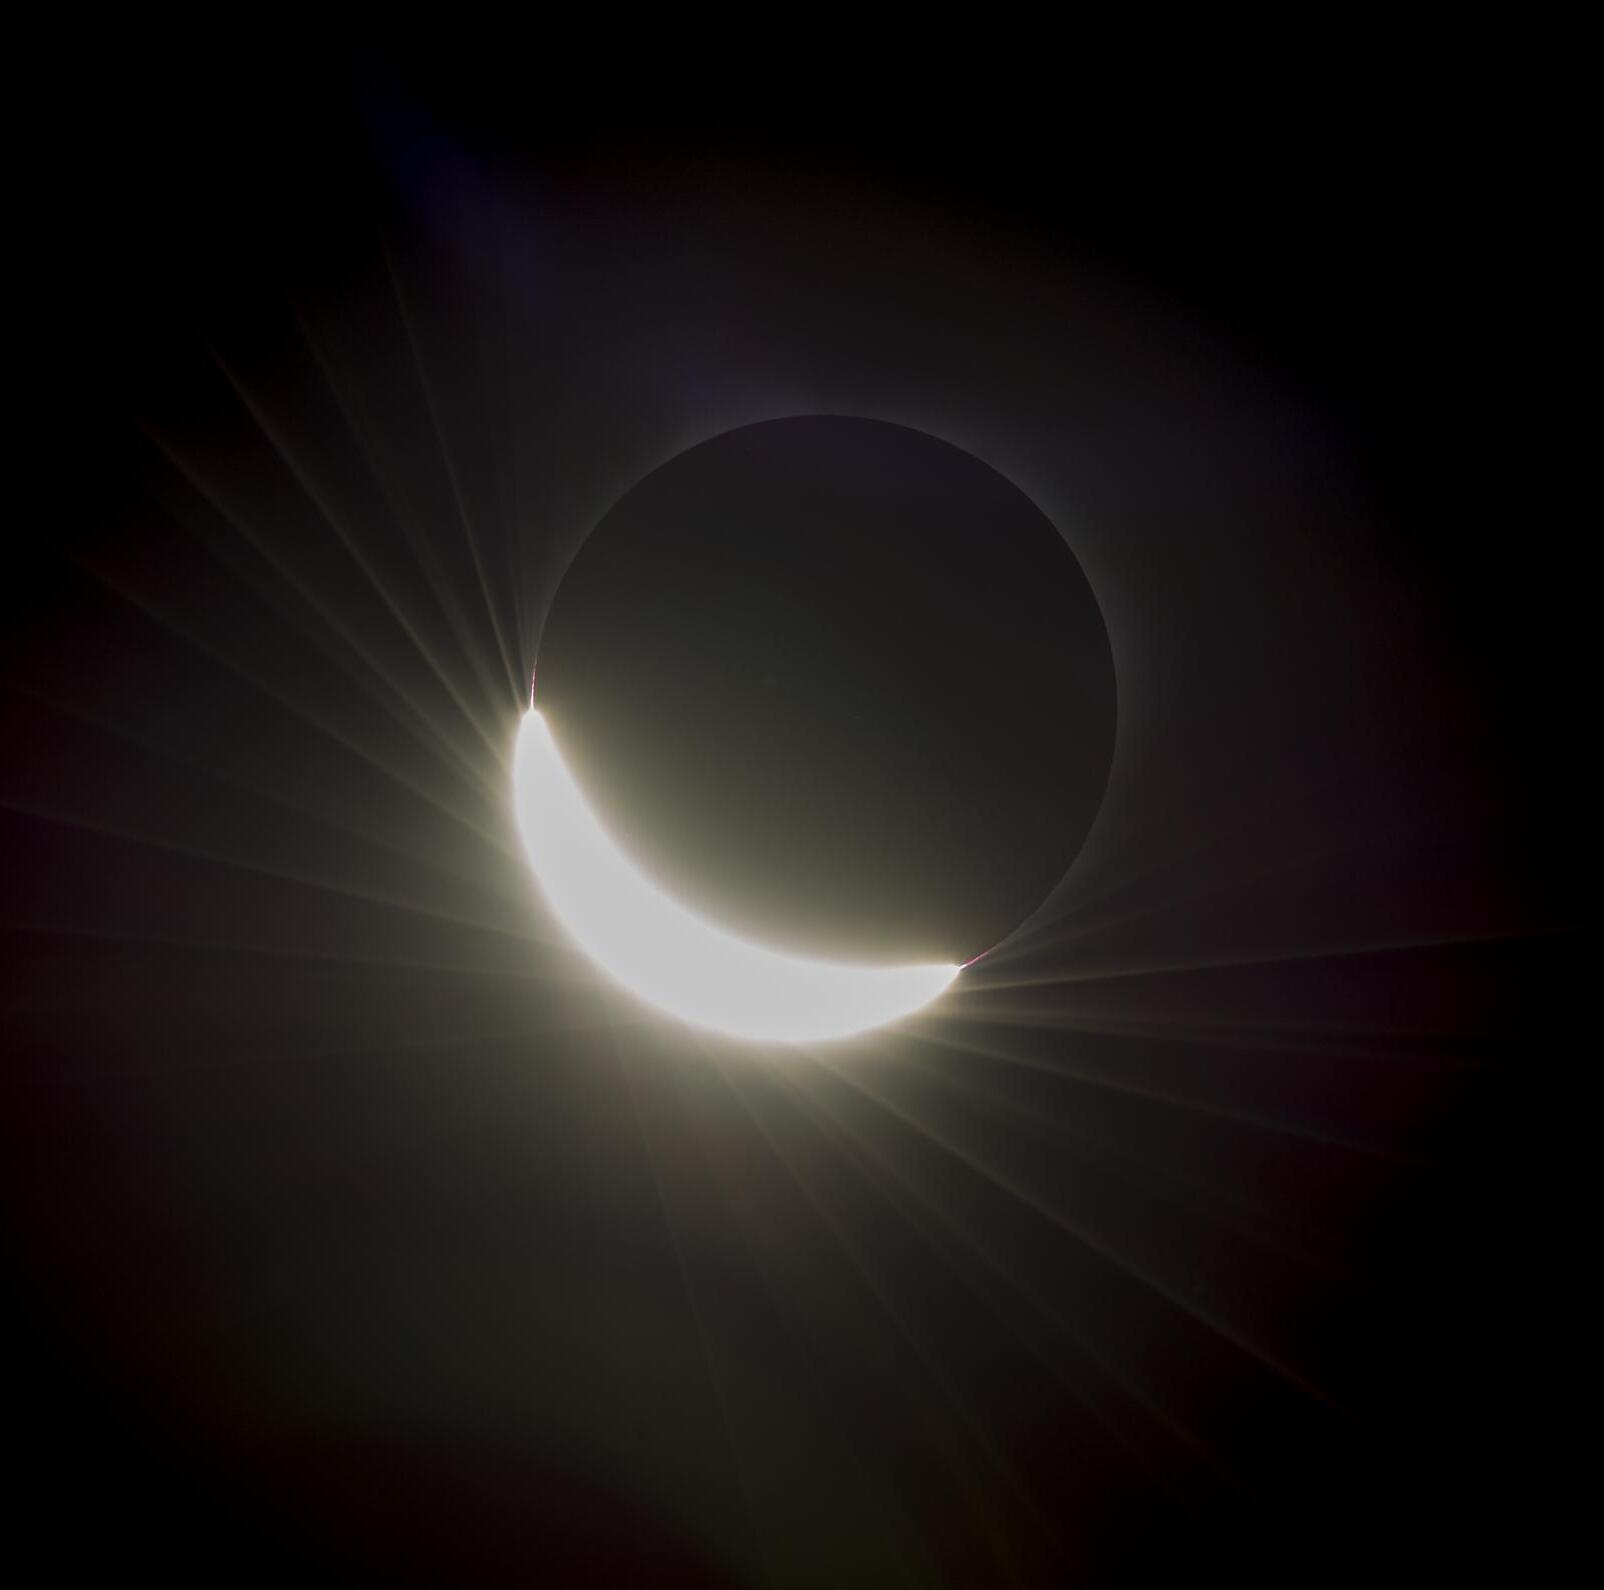 2 or 3 different pictures of the eclipse showing different stages of shadow. In each of the images parts of the Sun’s corona are visible. 